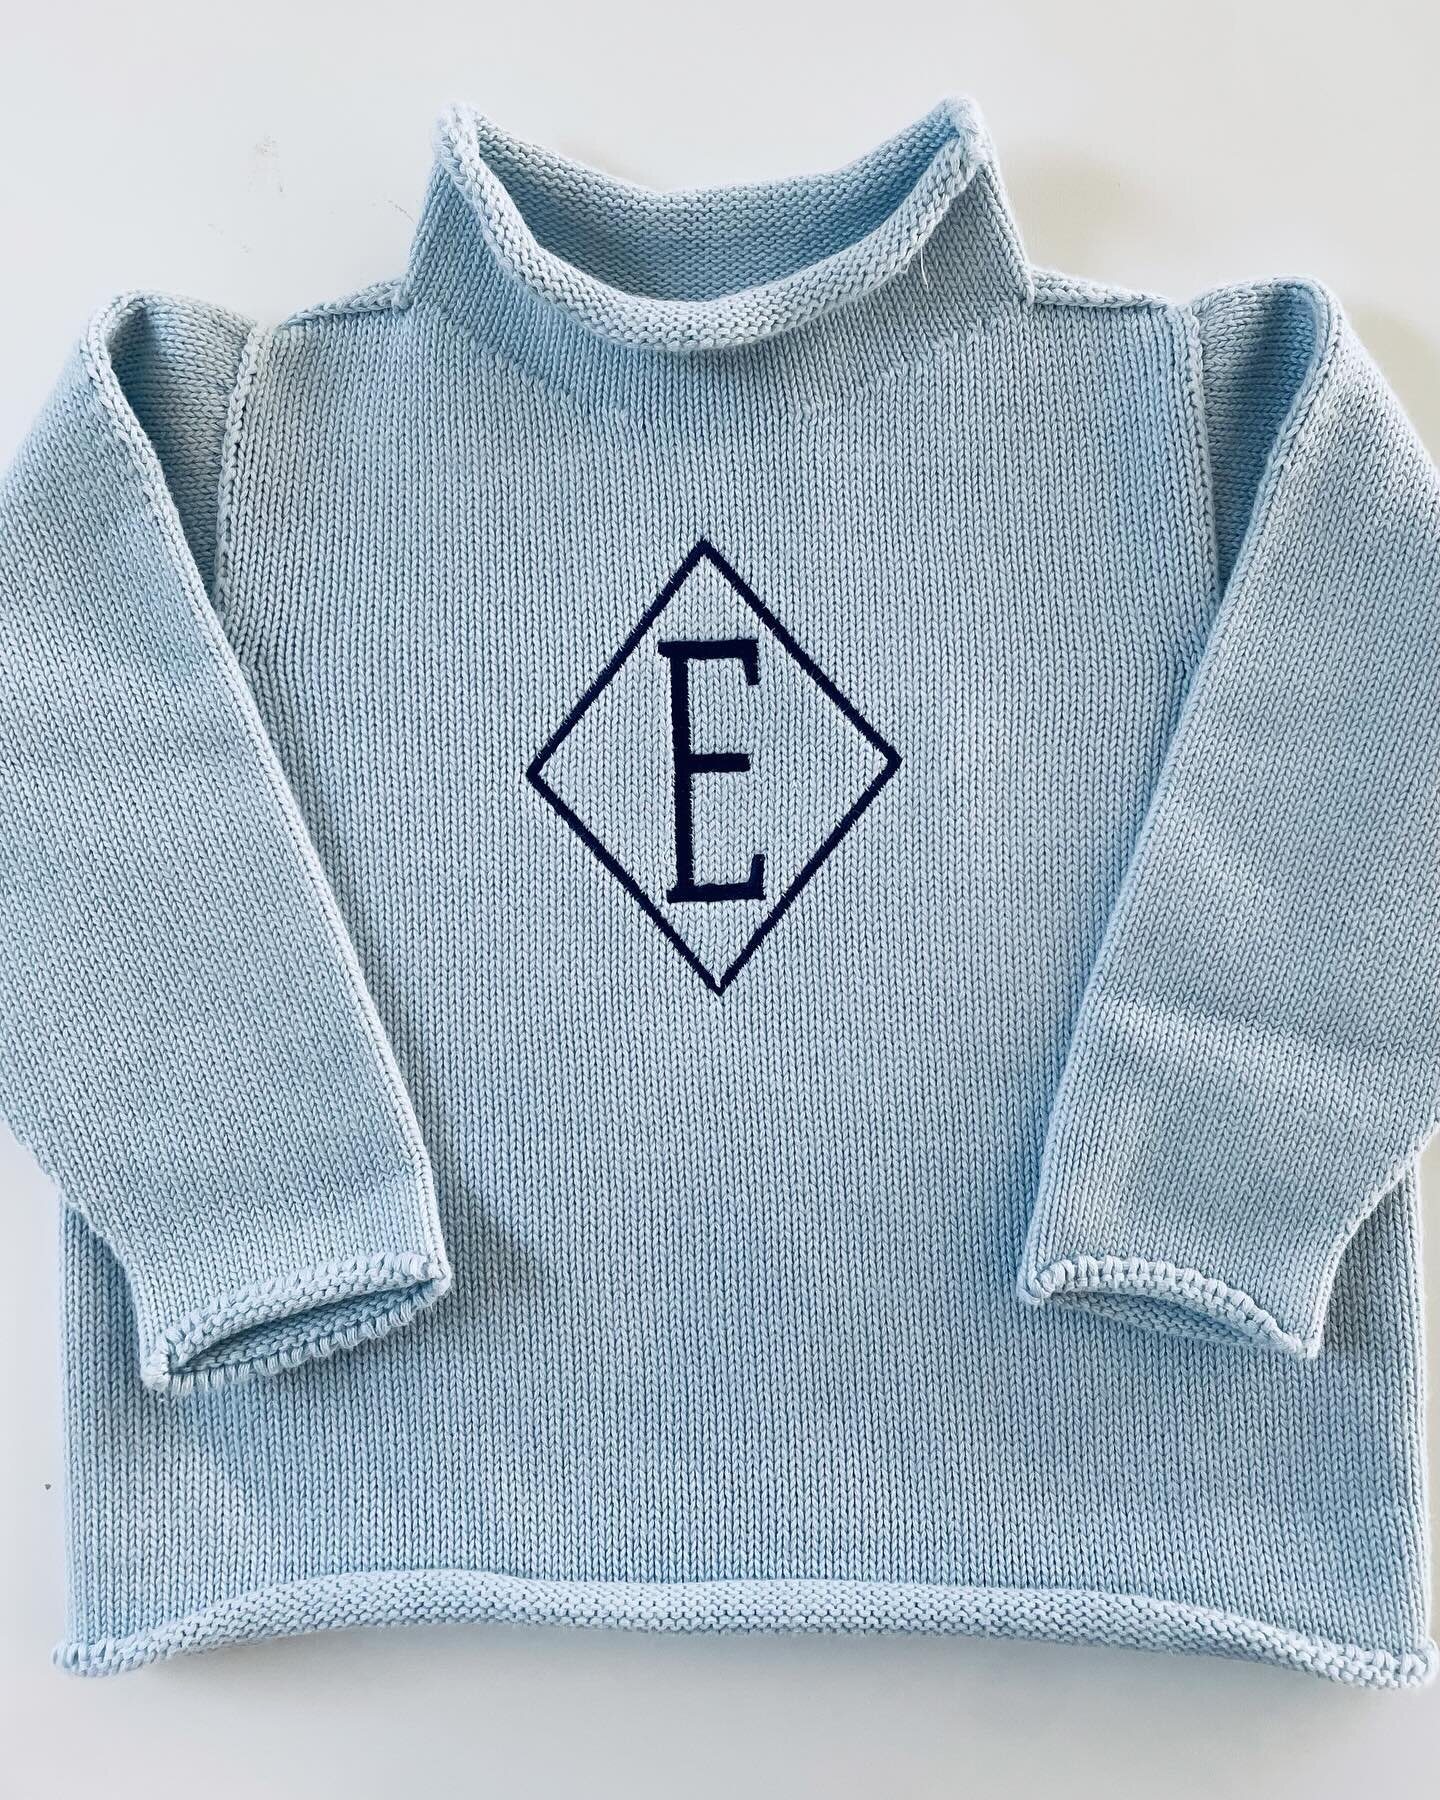 One of our most popular baby gifts!! The roll deck sweater is just a classic 😍👼